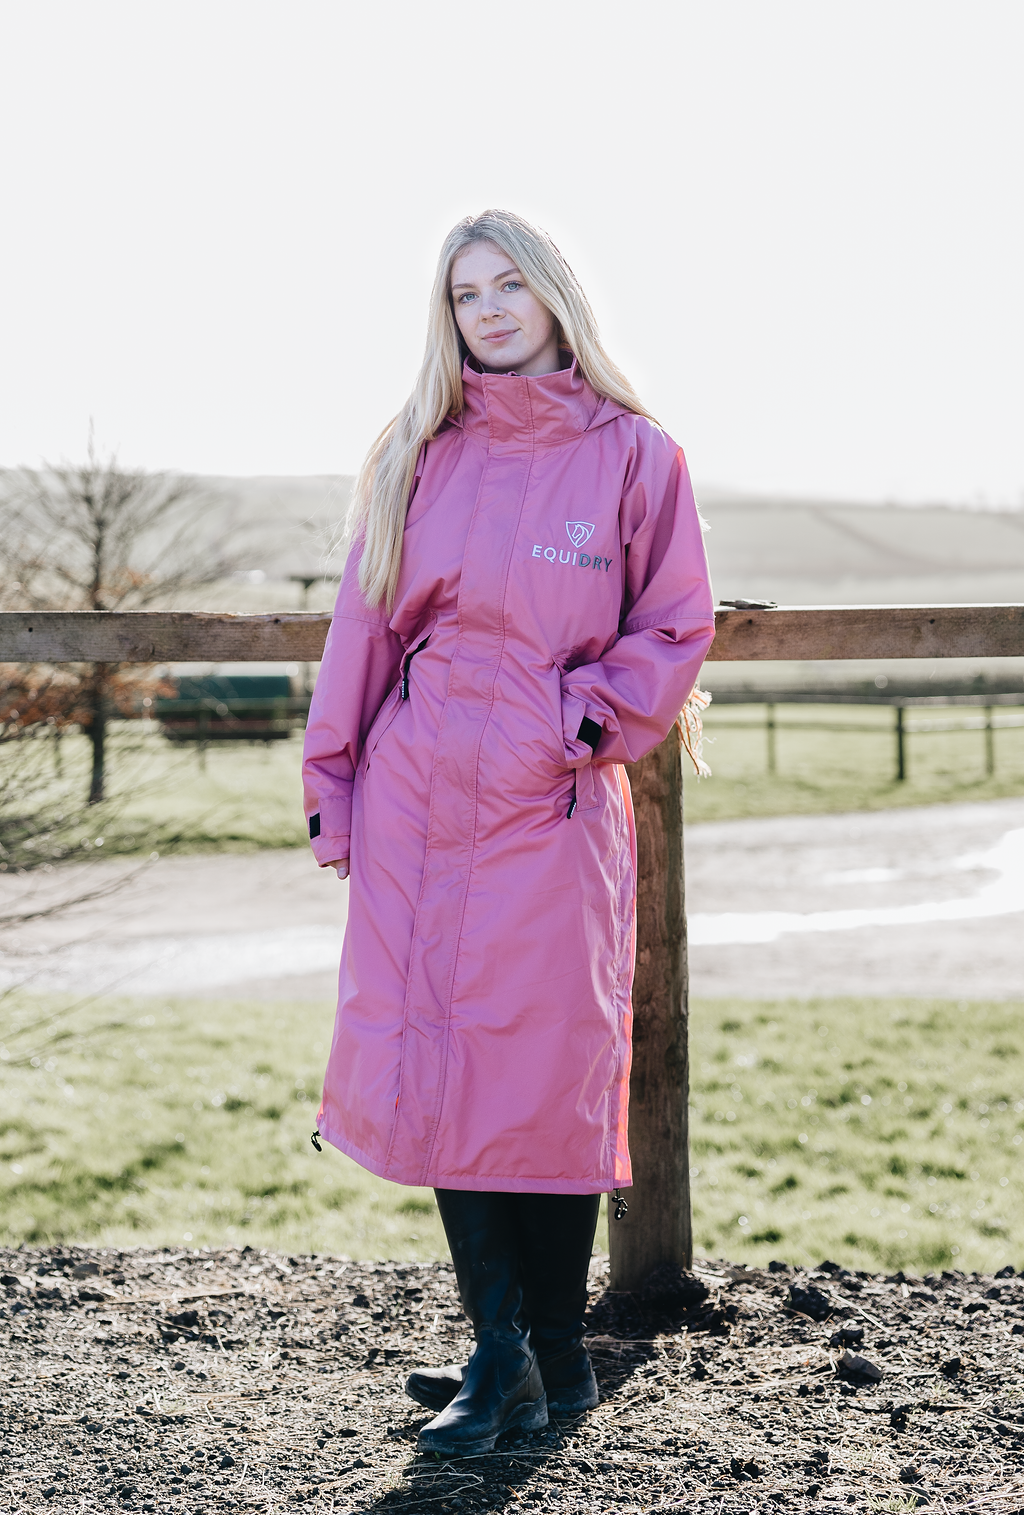 EQUIDRY Pink long lightweight waterproof horse riding coat worn by female adult 